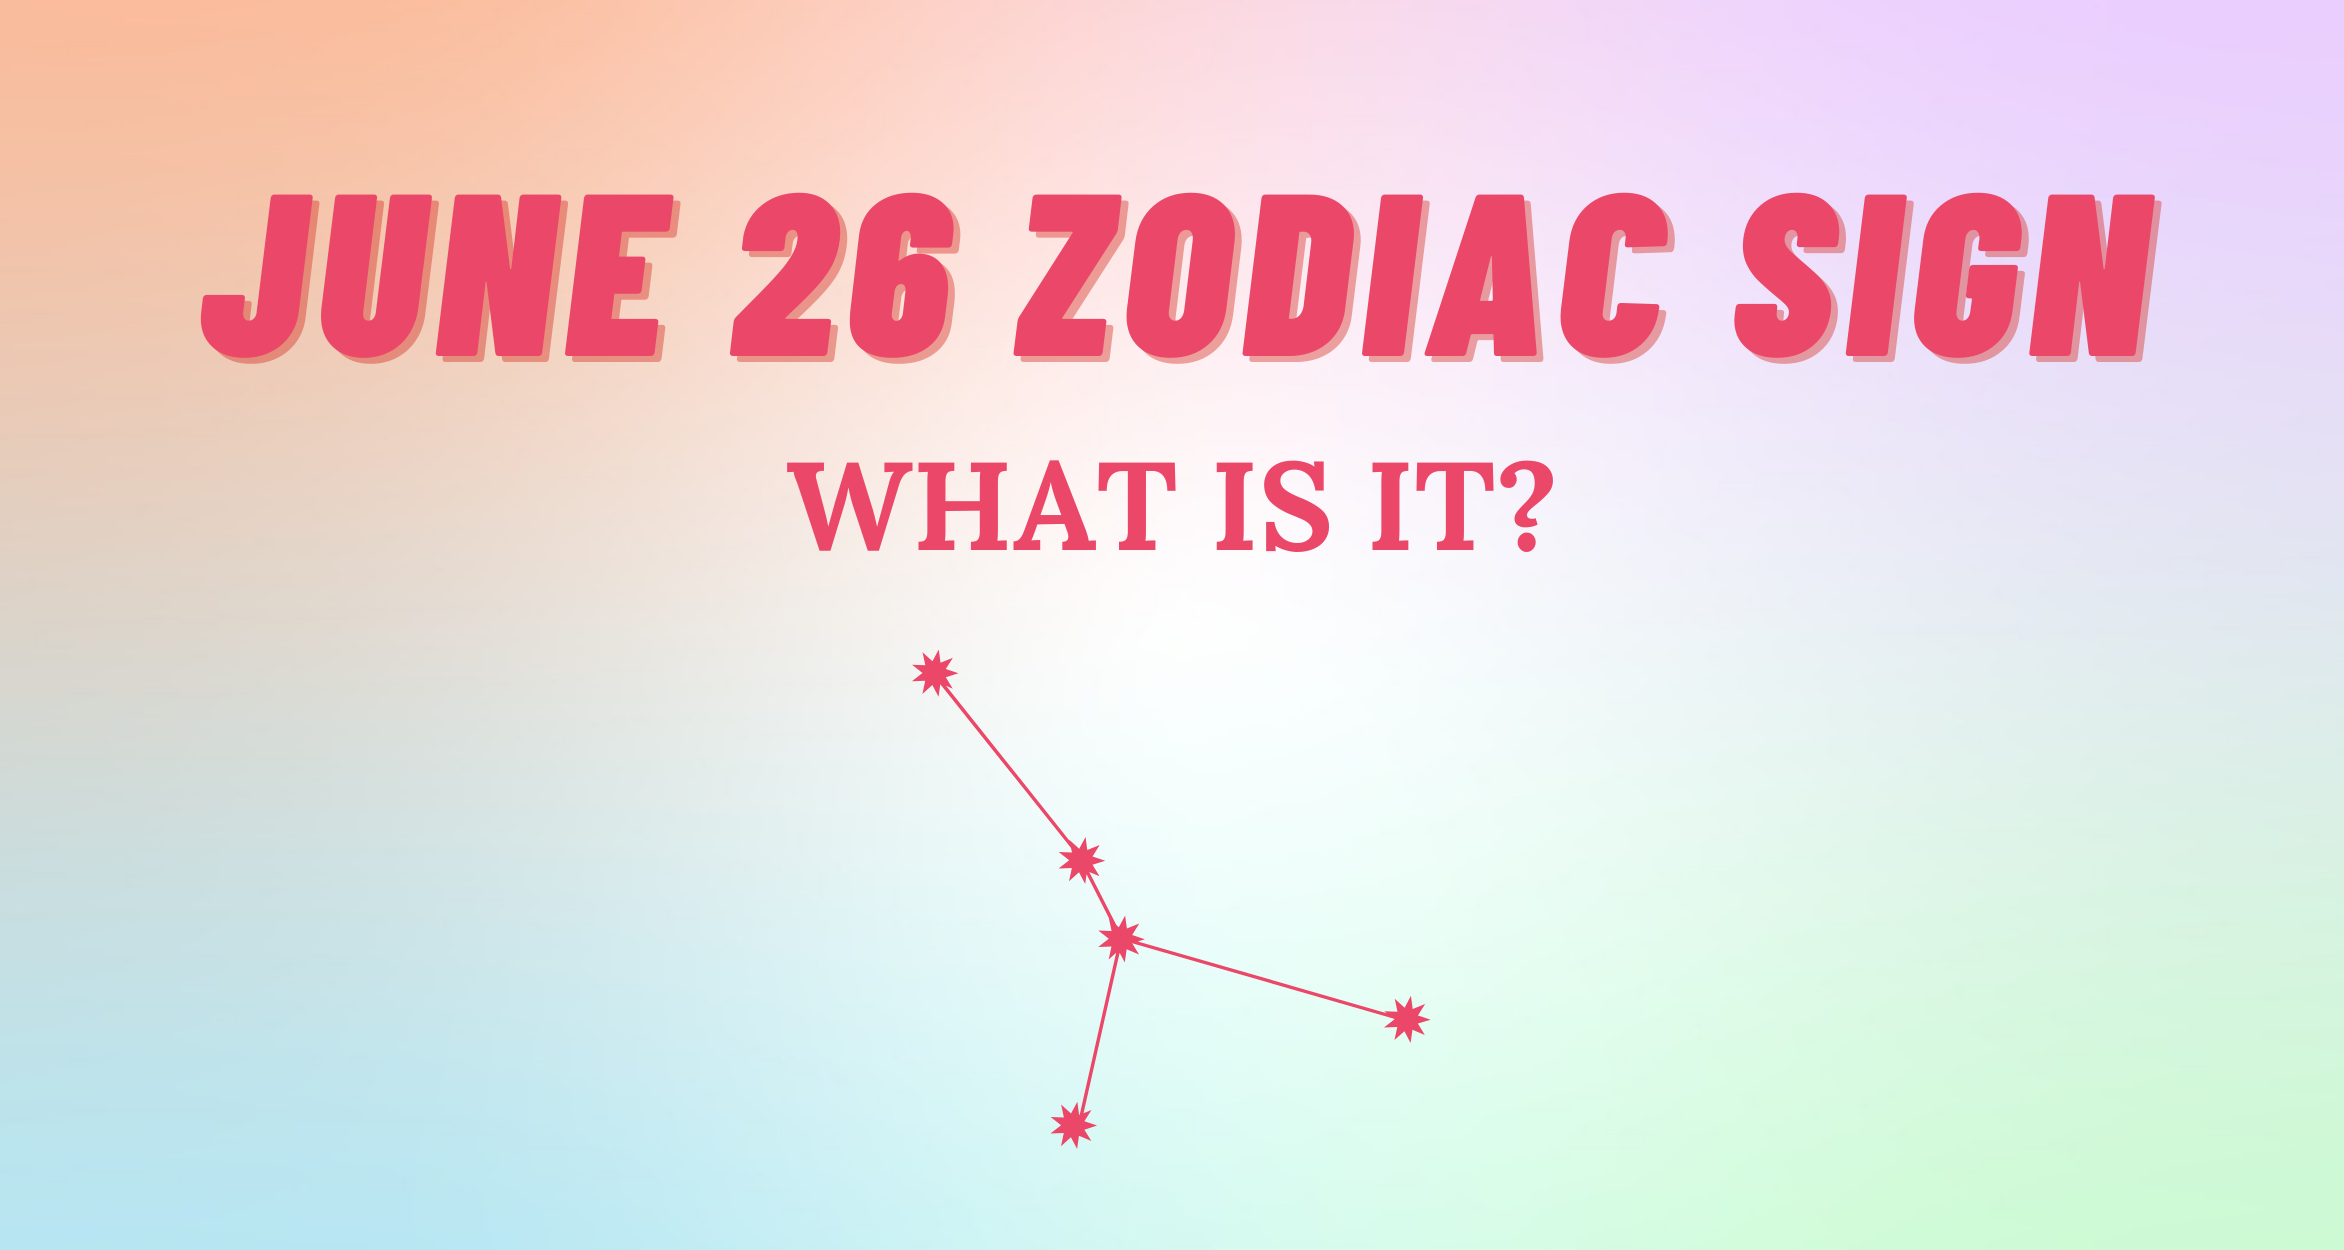 June 26 Zodiac Sign Explained | So Syncd